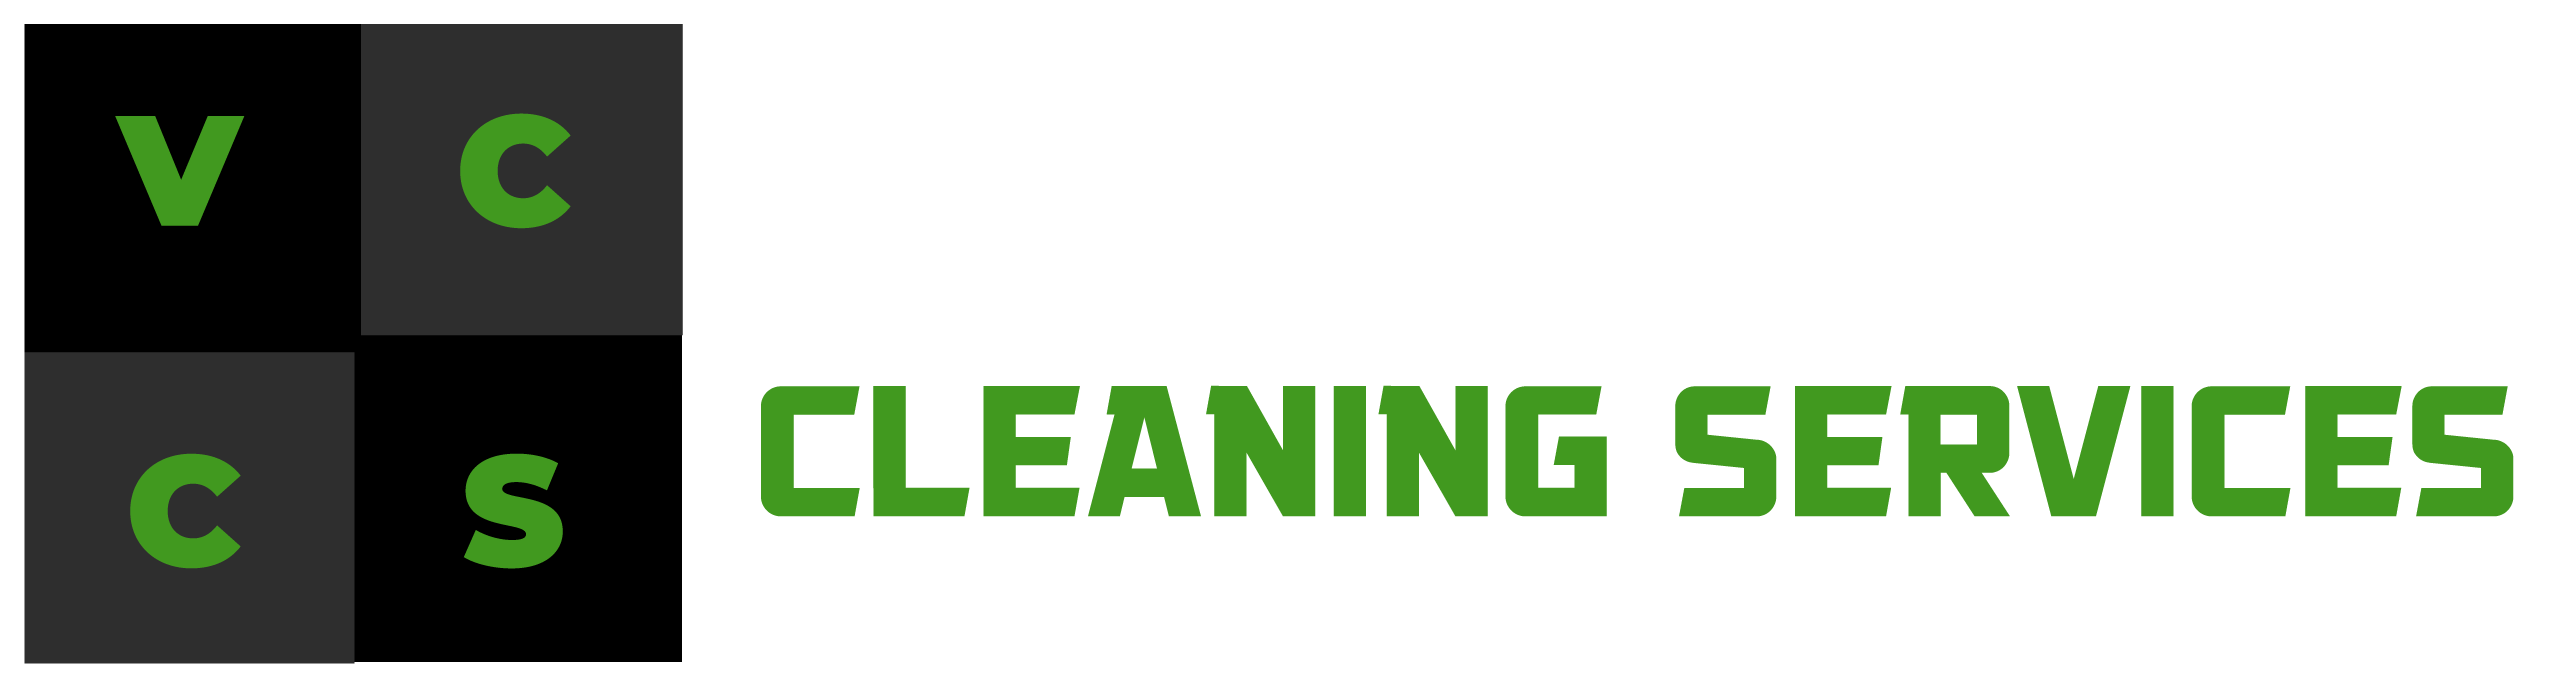 Ventura County Cleaning Services